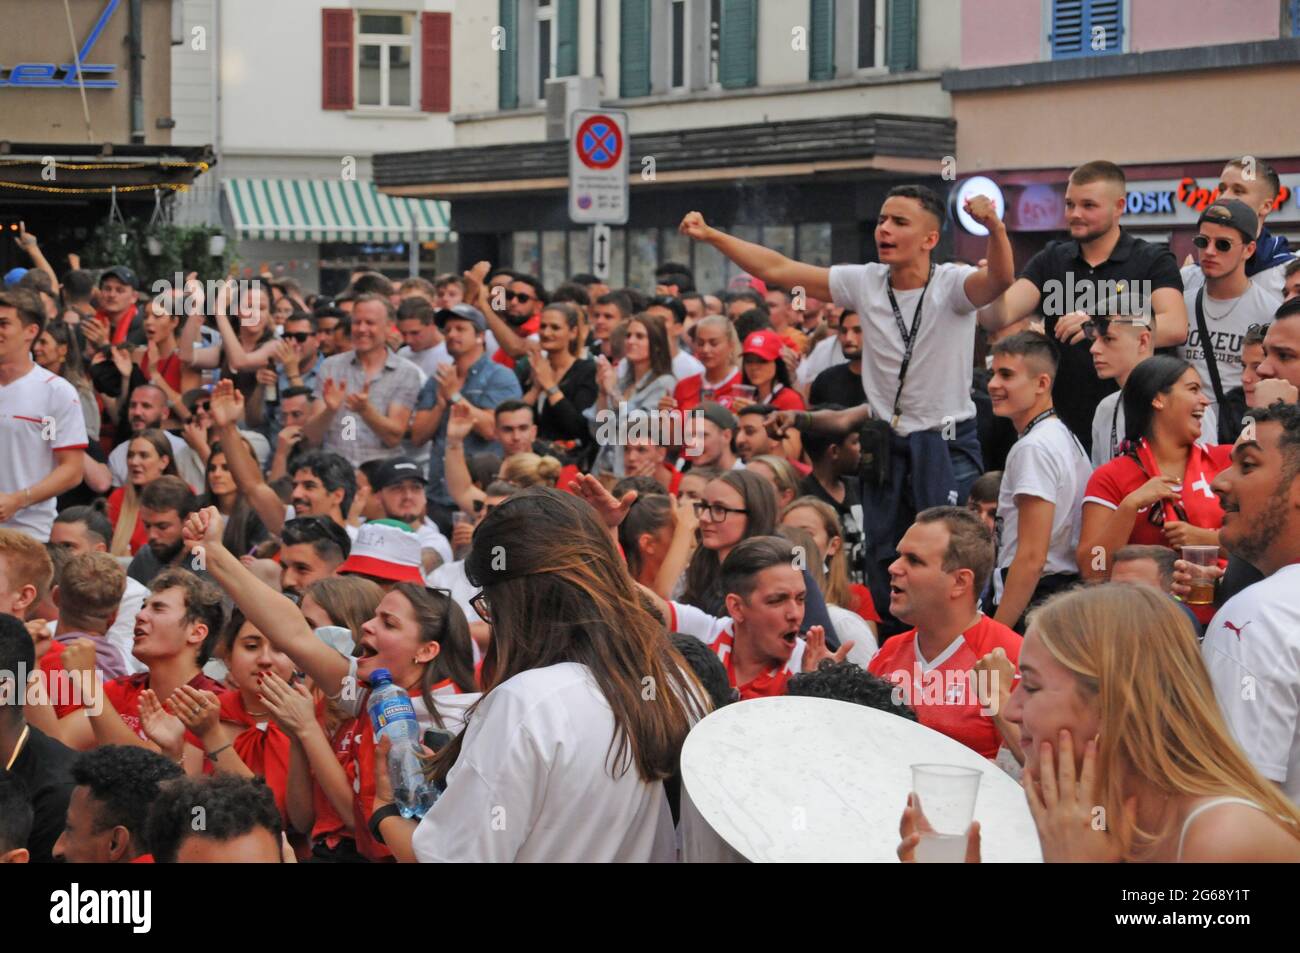 Zurich Football Champion Switzerland High Resolution Stock Photography and  Images - Alamy